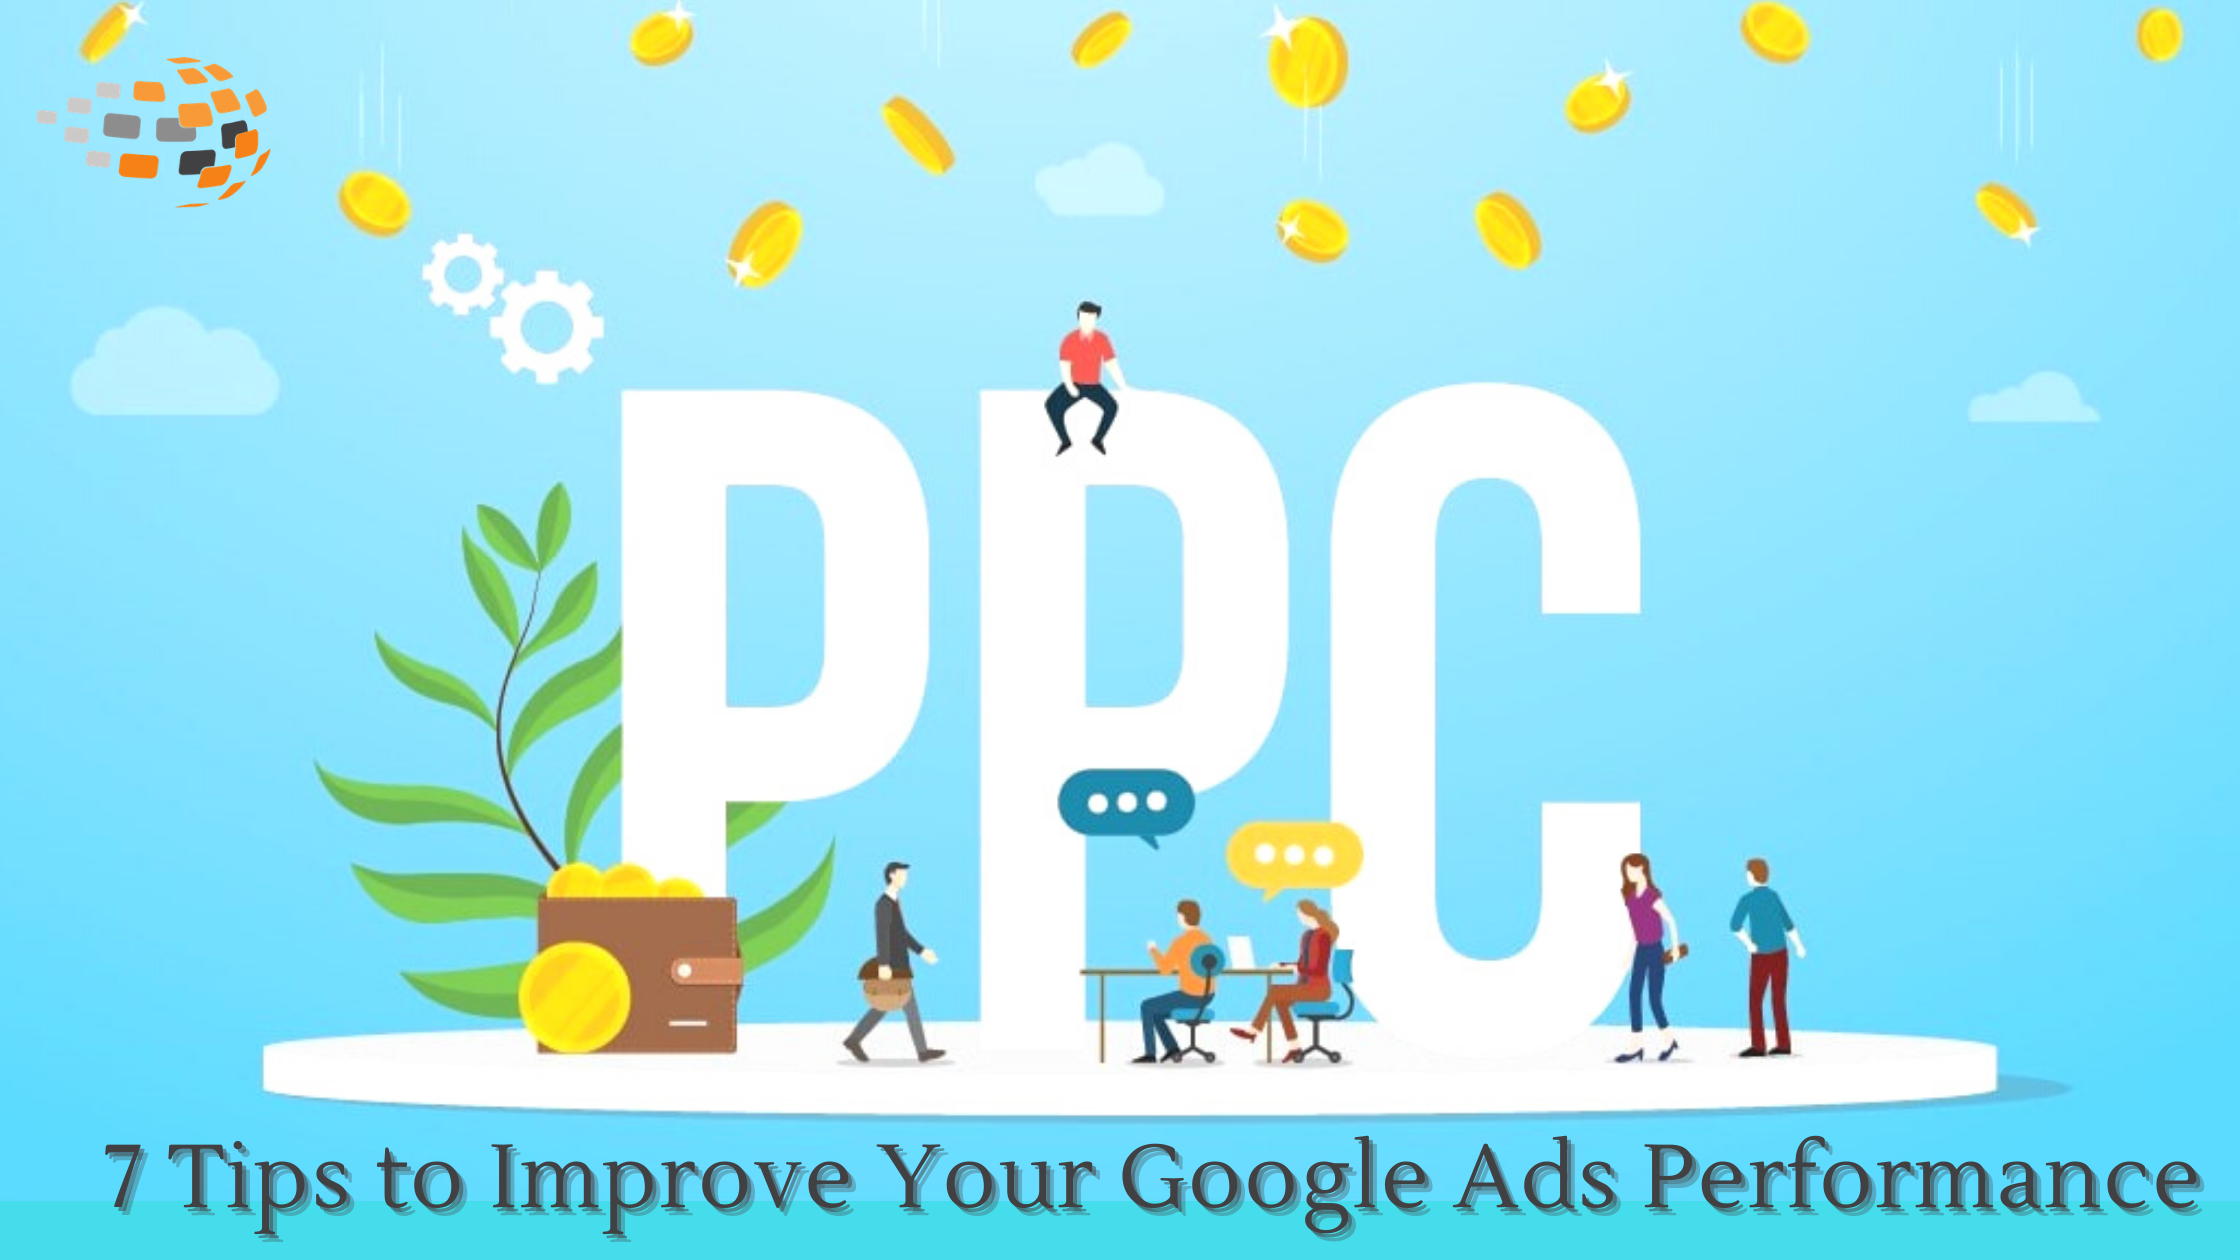 7 Tips to Improve Your Google Ads Performance